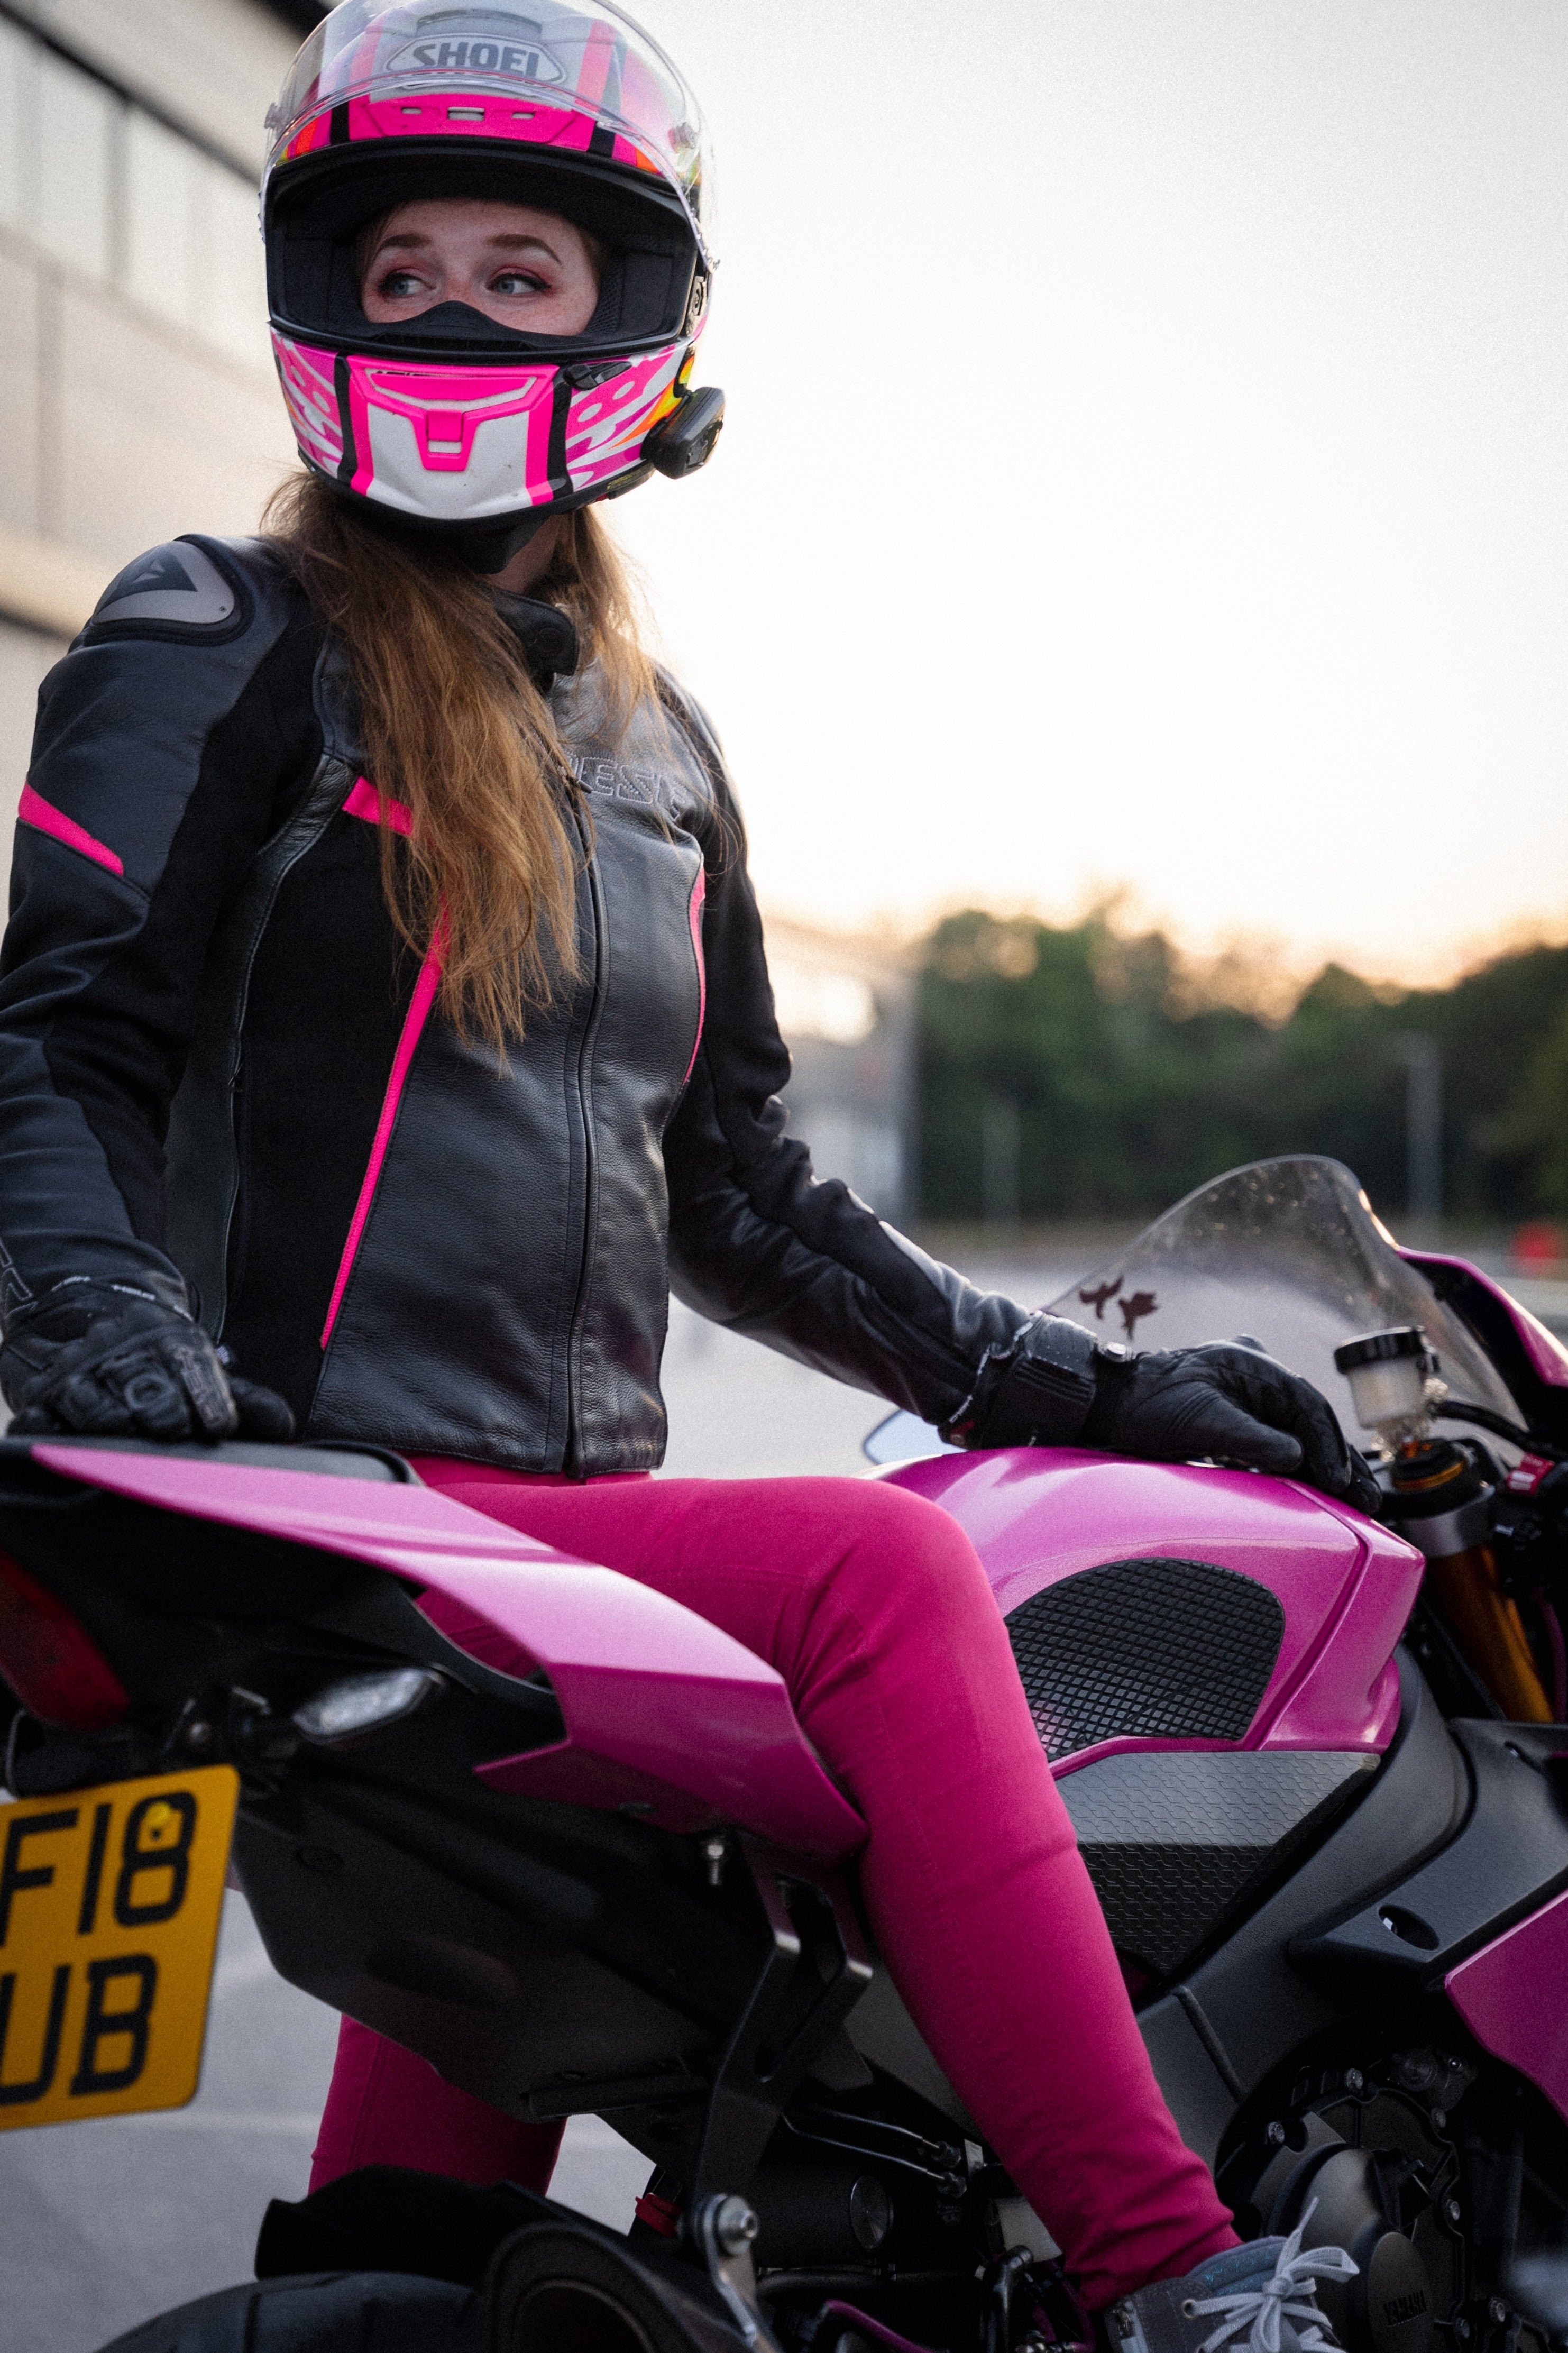 Motorbike Cargo Trouser Pink Camo Ladies Motorcycle Jeans with DuPont™  Kevlar®